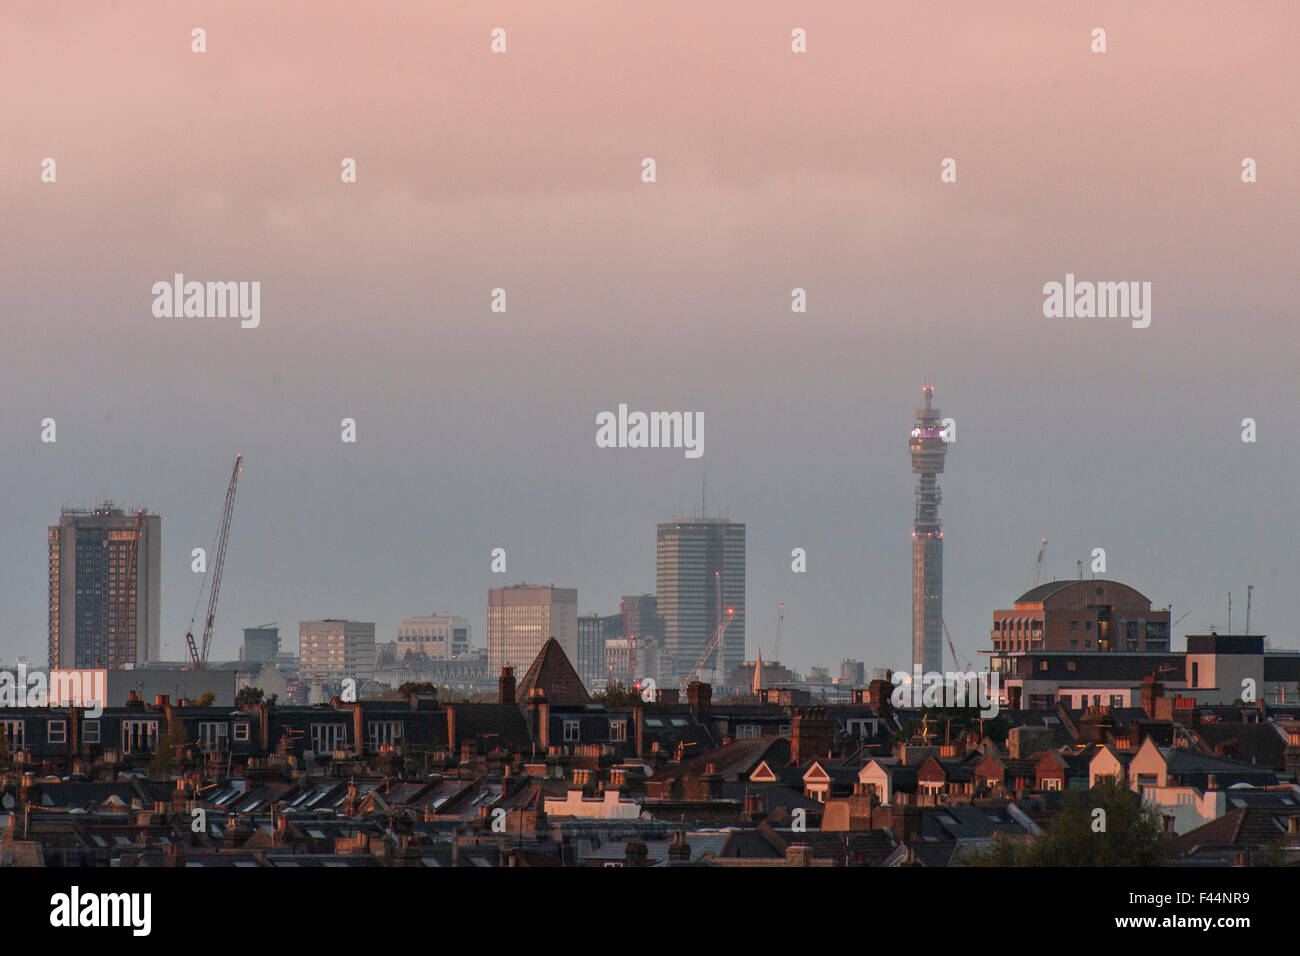 Dawn over a London skyline with the BT Tower Stock Photo